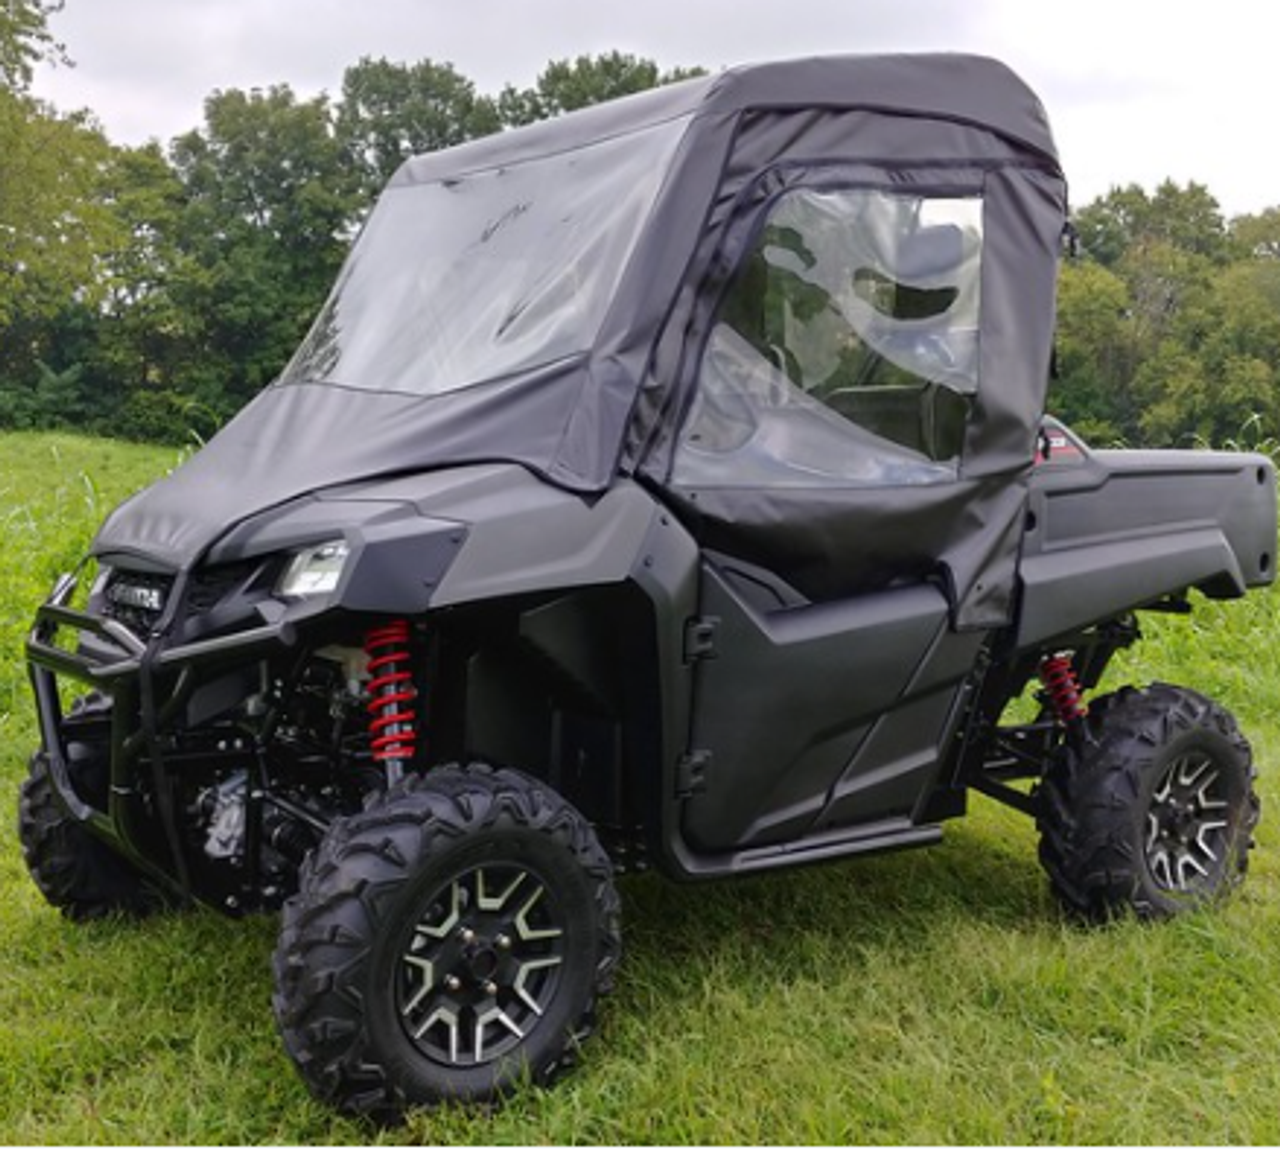 3 Star side x side Honda Pioneer 700 full cab enclosure front and side angle view